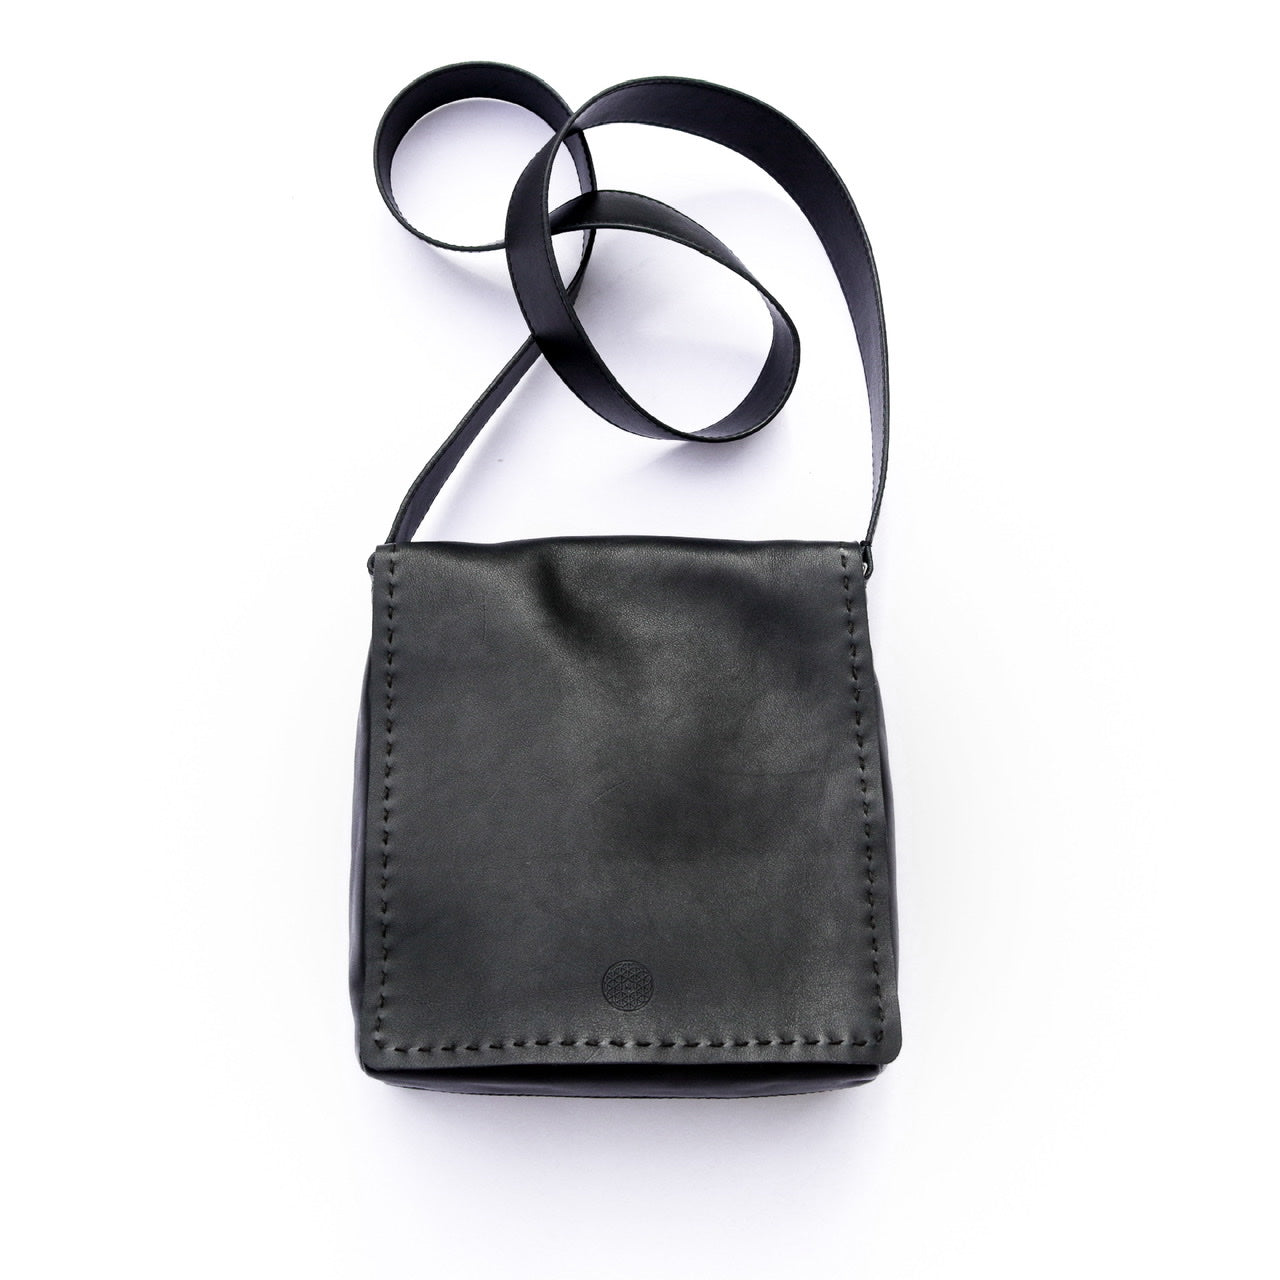 anastasia bag in black calfleather new Philini collection